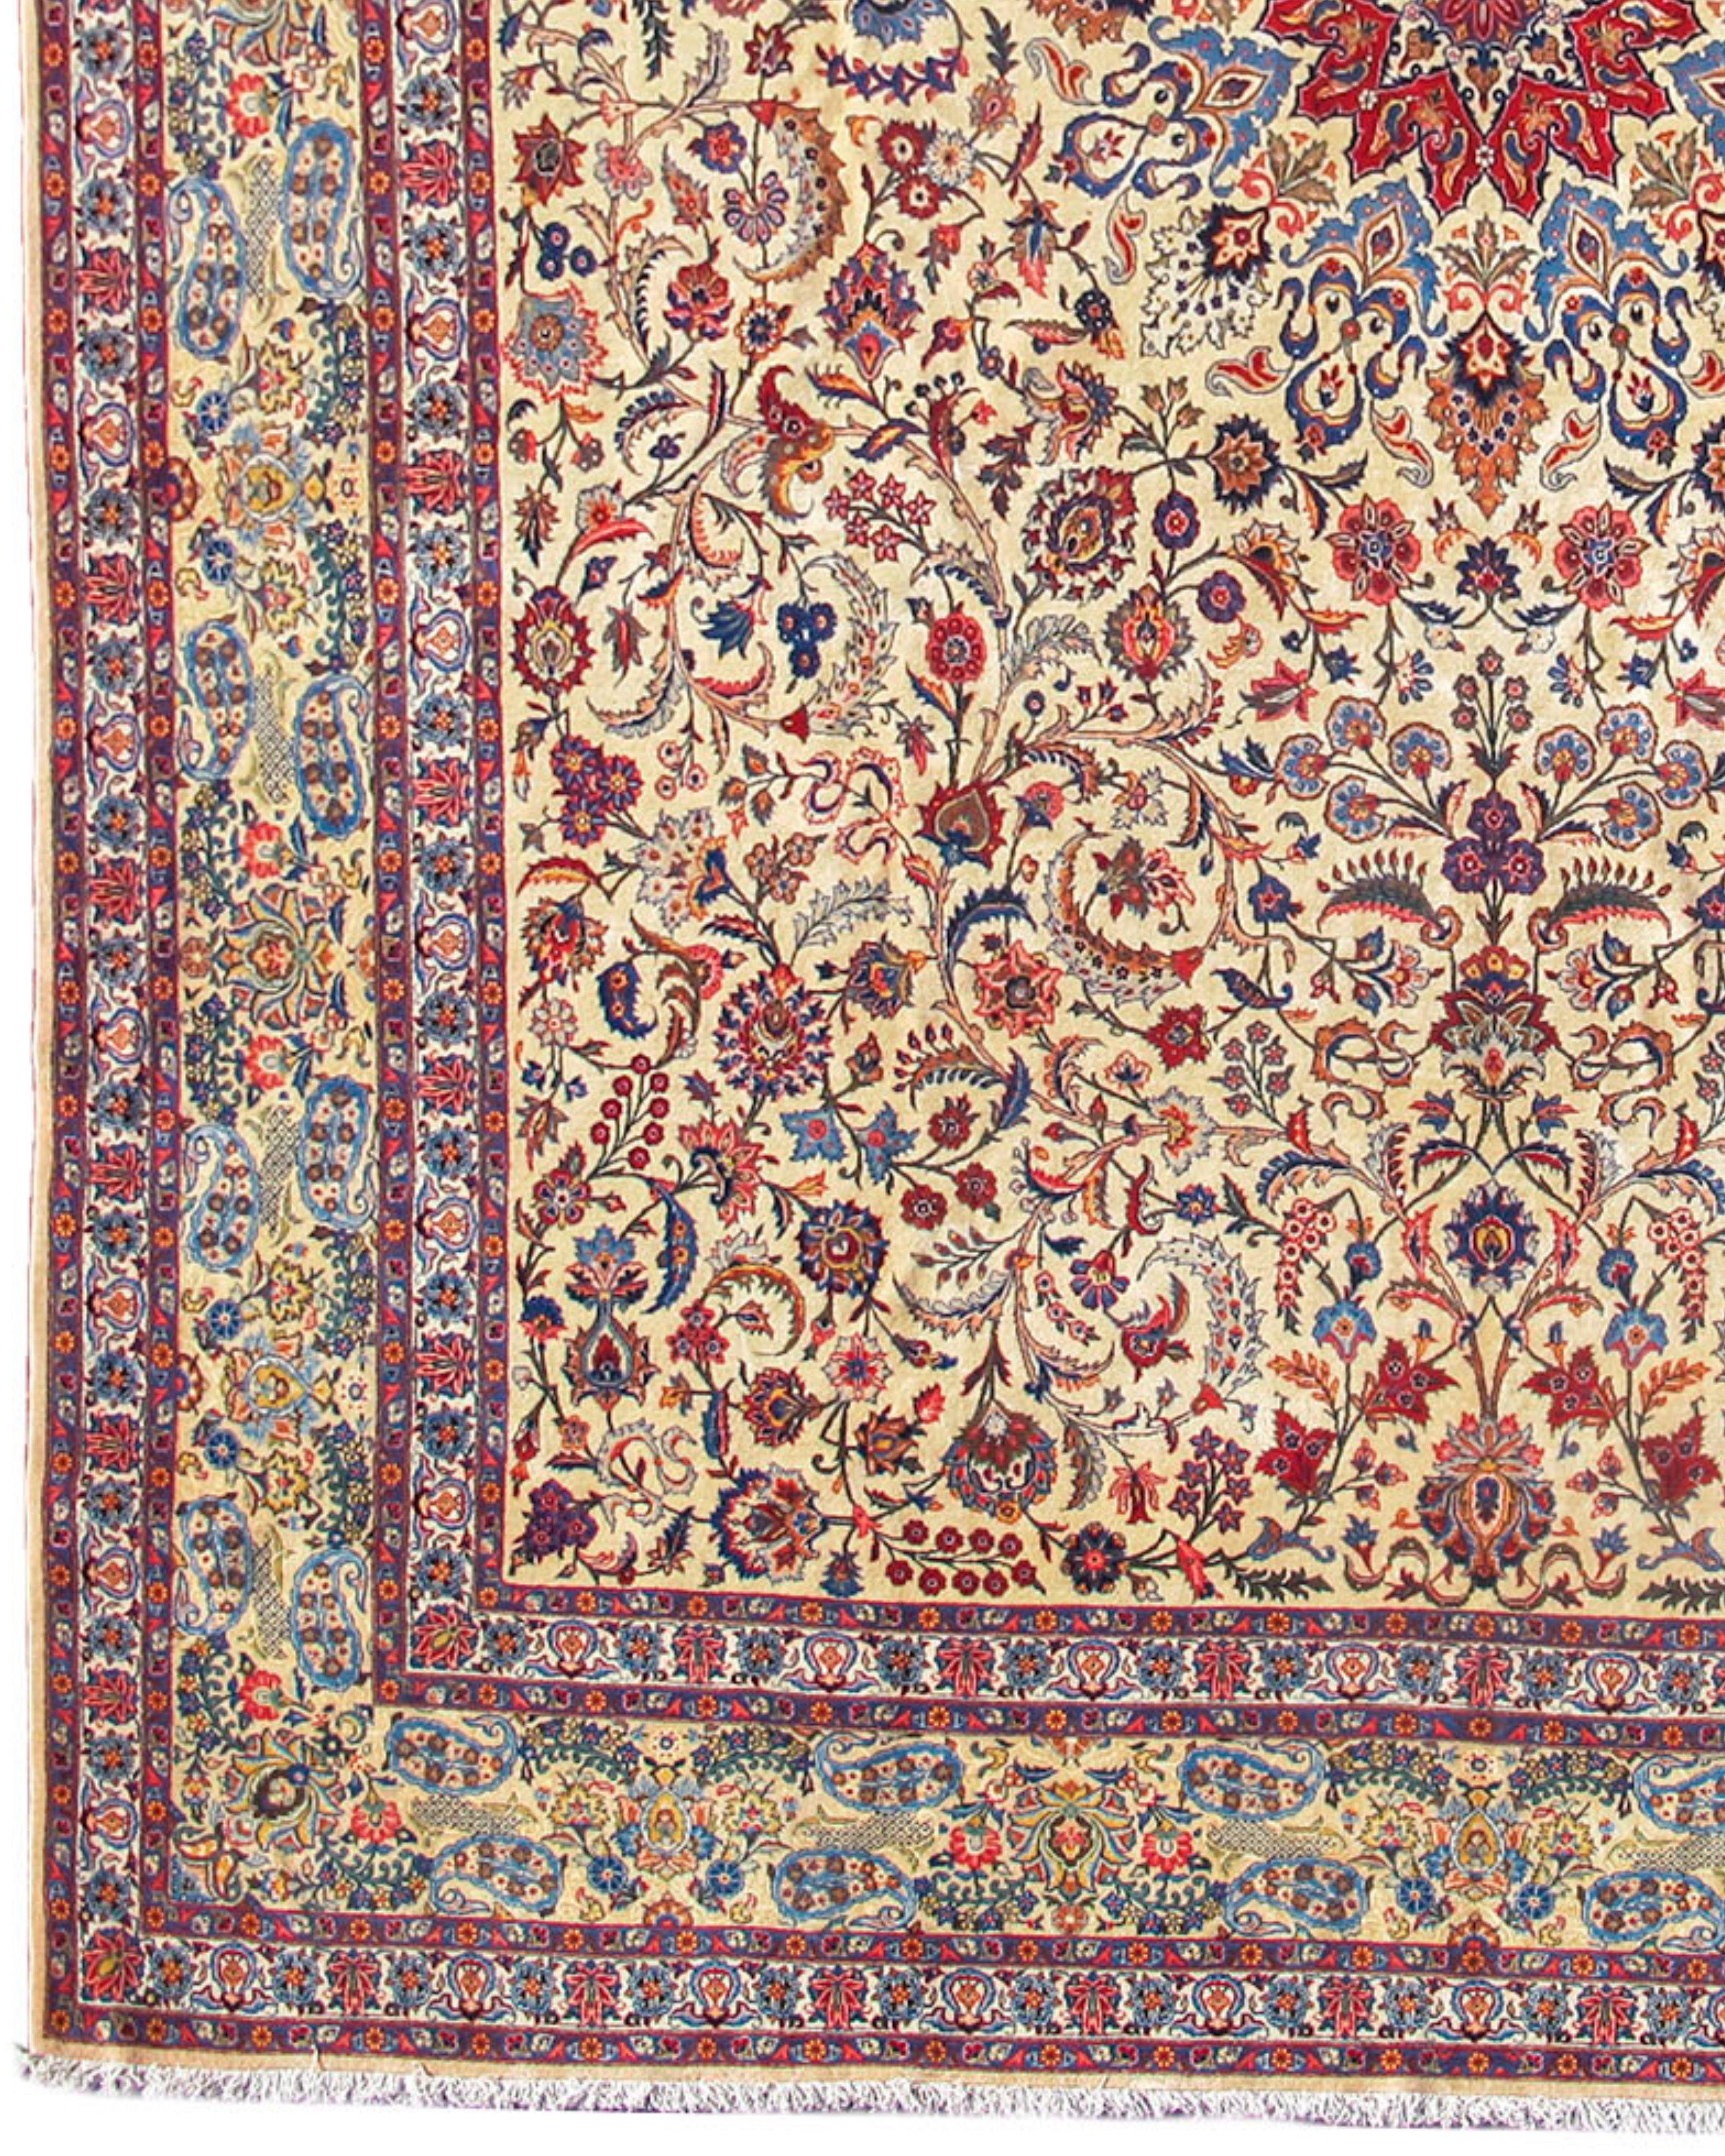 Hand-Woven Antique Large Persian Kashan Carpet, Mid-20th Century For Sale